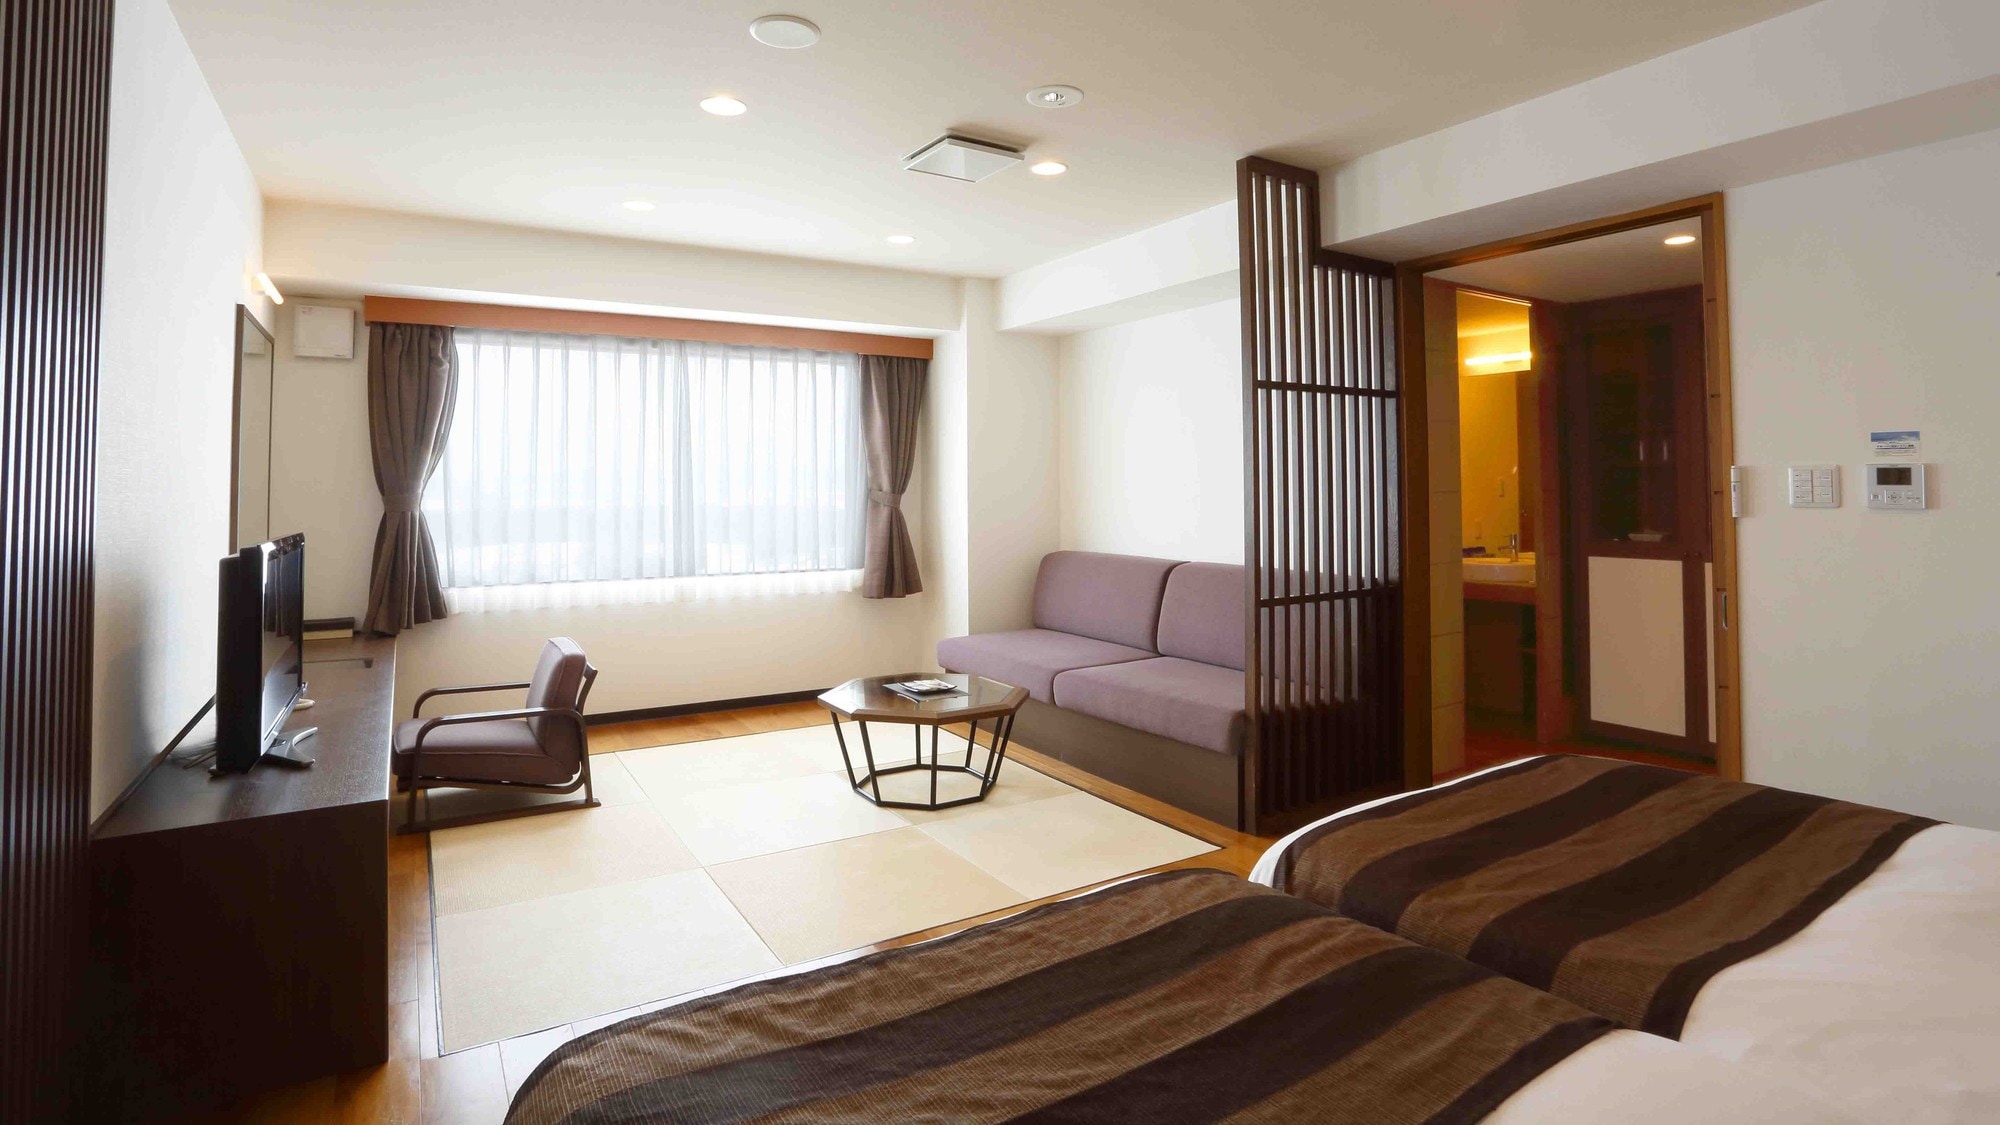 [Tower Building] Japanese-Western style room (example) / Japanese-Western style room with a modern taste that has a spacious Japanese-style space with tatami mats